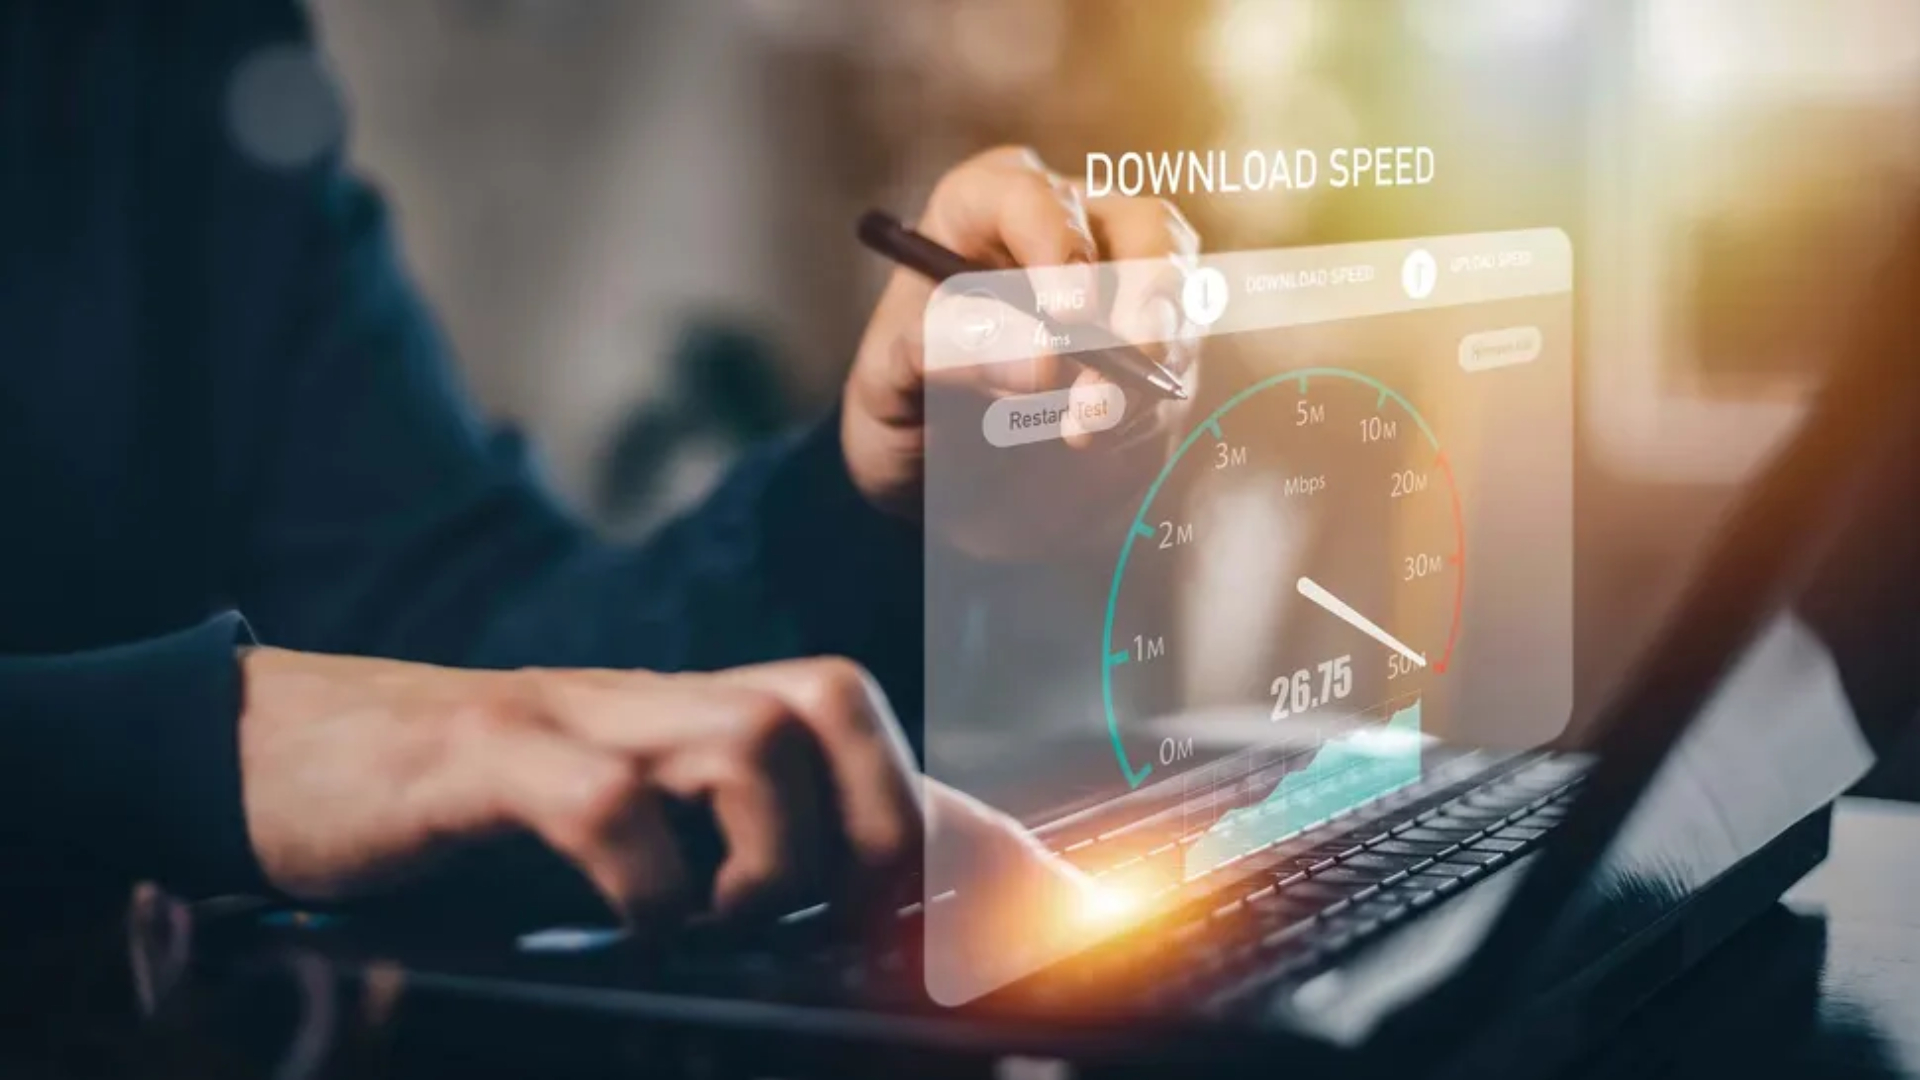 Top 7 Apps to Get Free Data and Boost Your Internet Speed